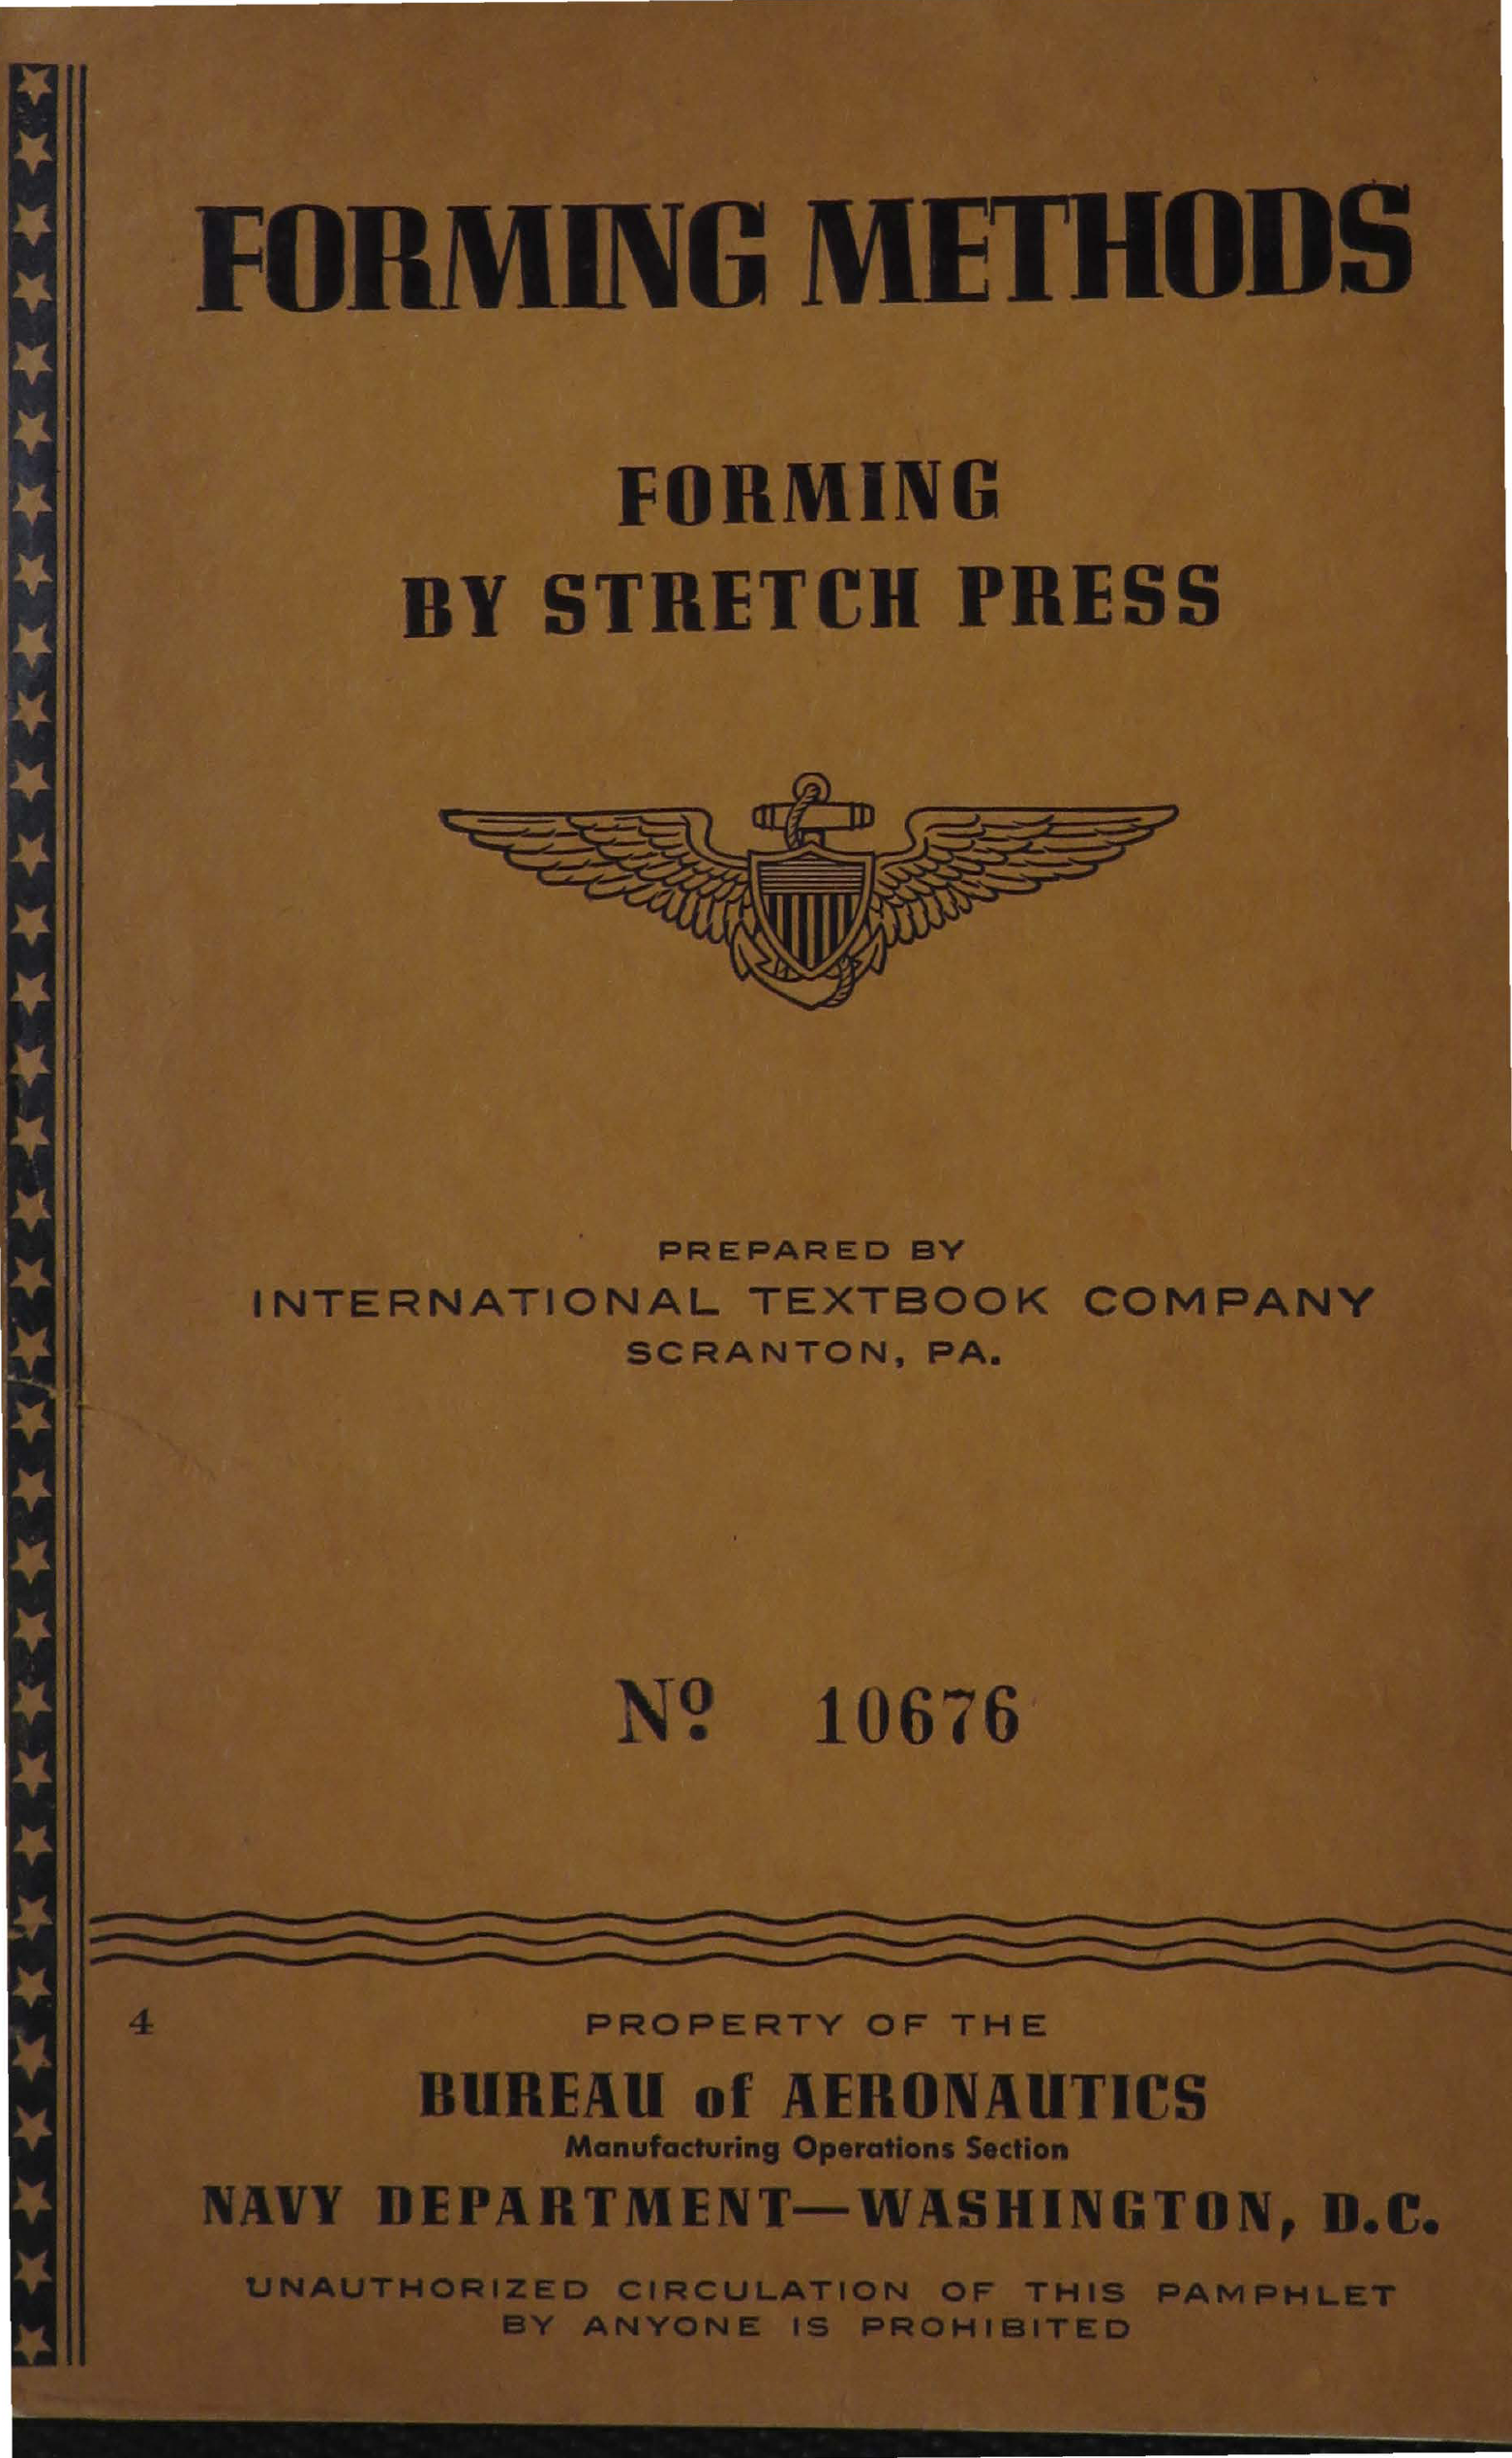 Sample page 1 from AirCorps Library document: Forming Methods - Forming by Stretch Press - Bureau of Aeronautics